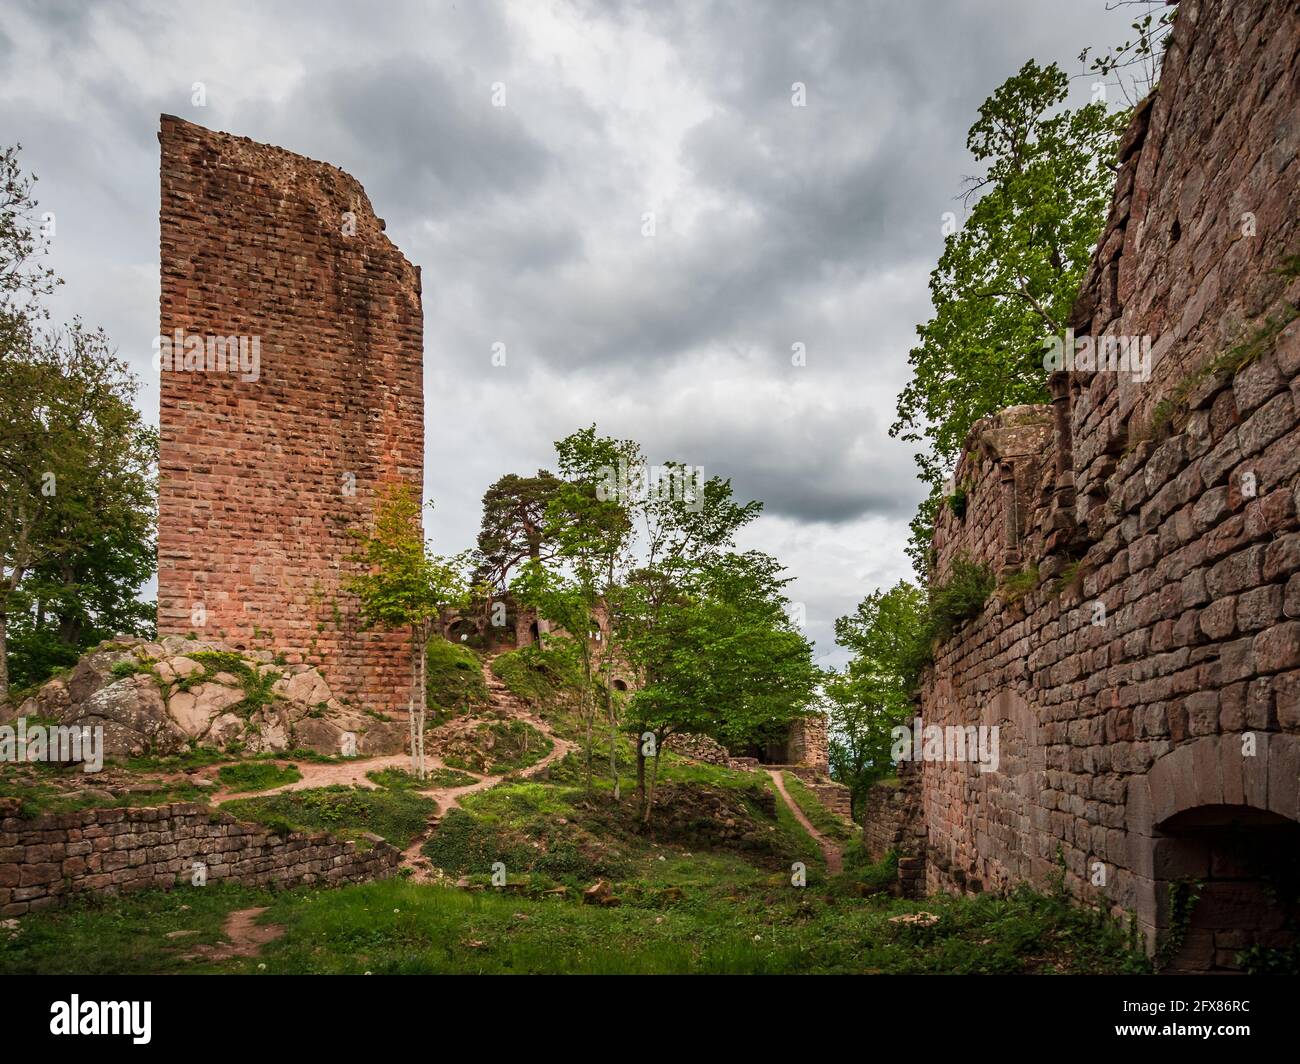 Medieval Castle Landsberg in Vosges, Alsace. Ancient ruins in the mountains. France. Stock Photo